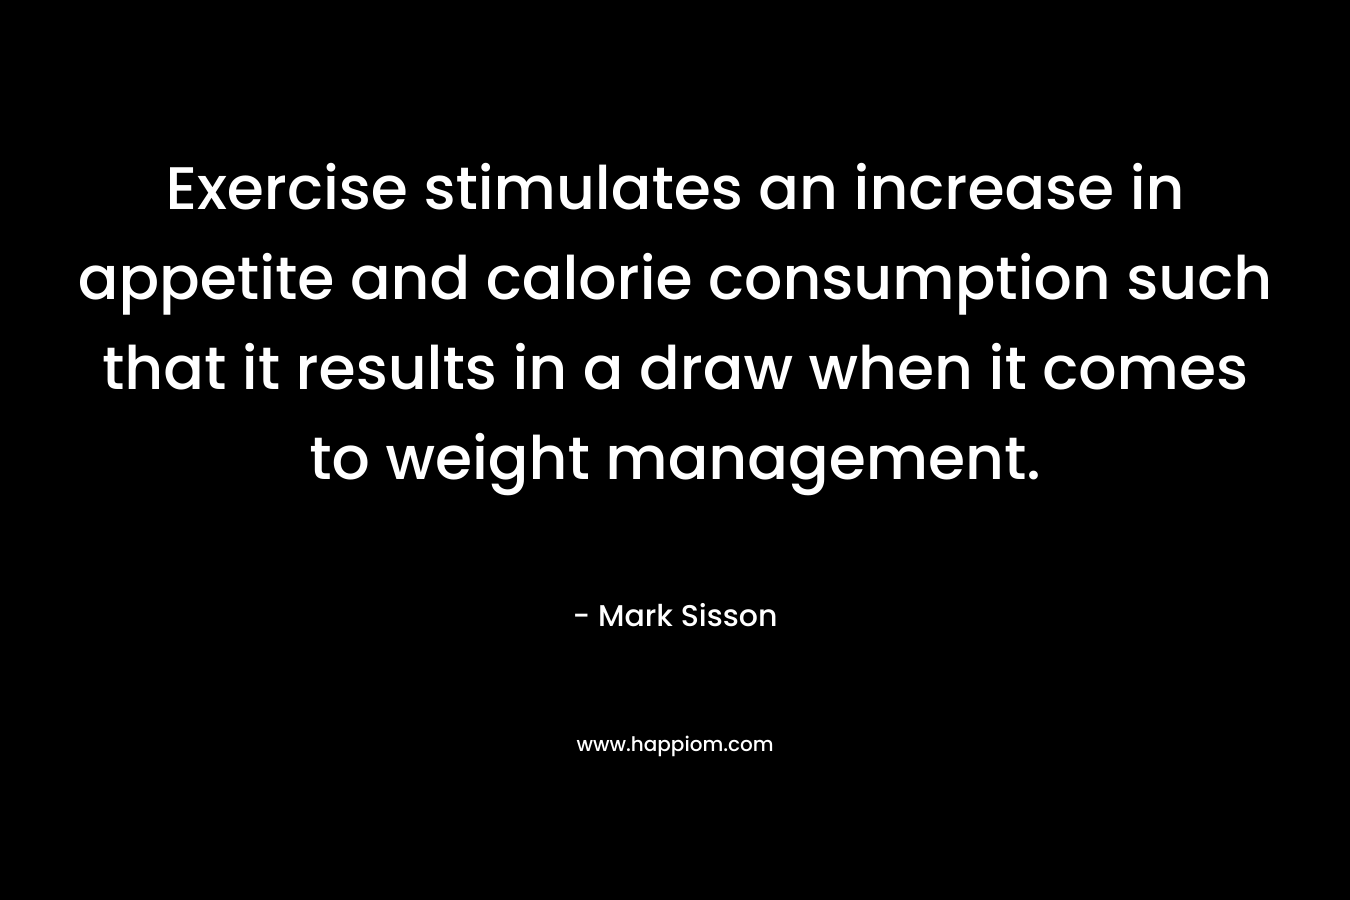 Exercise stimulates an increase in appetite and calorie consumption such that it results in a draw when it comes to weight management. – Mark Sisson